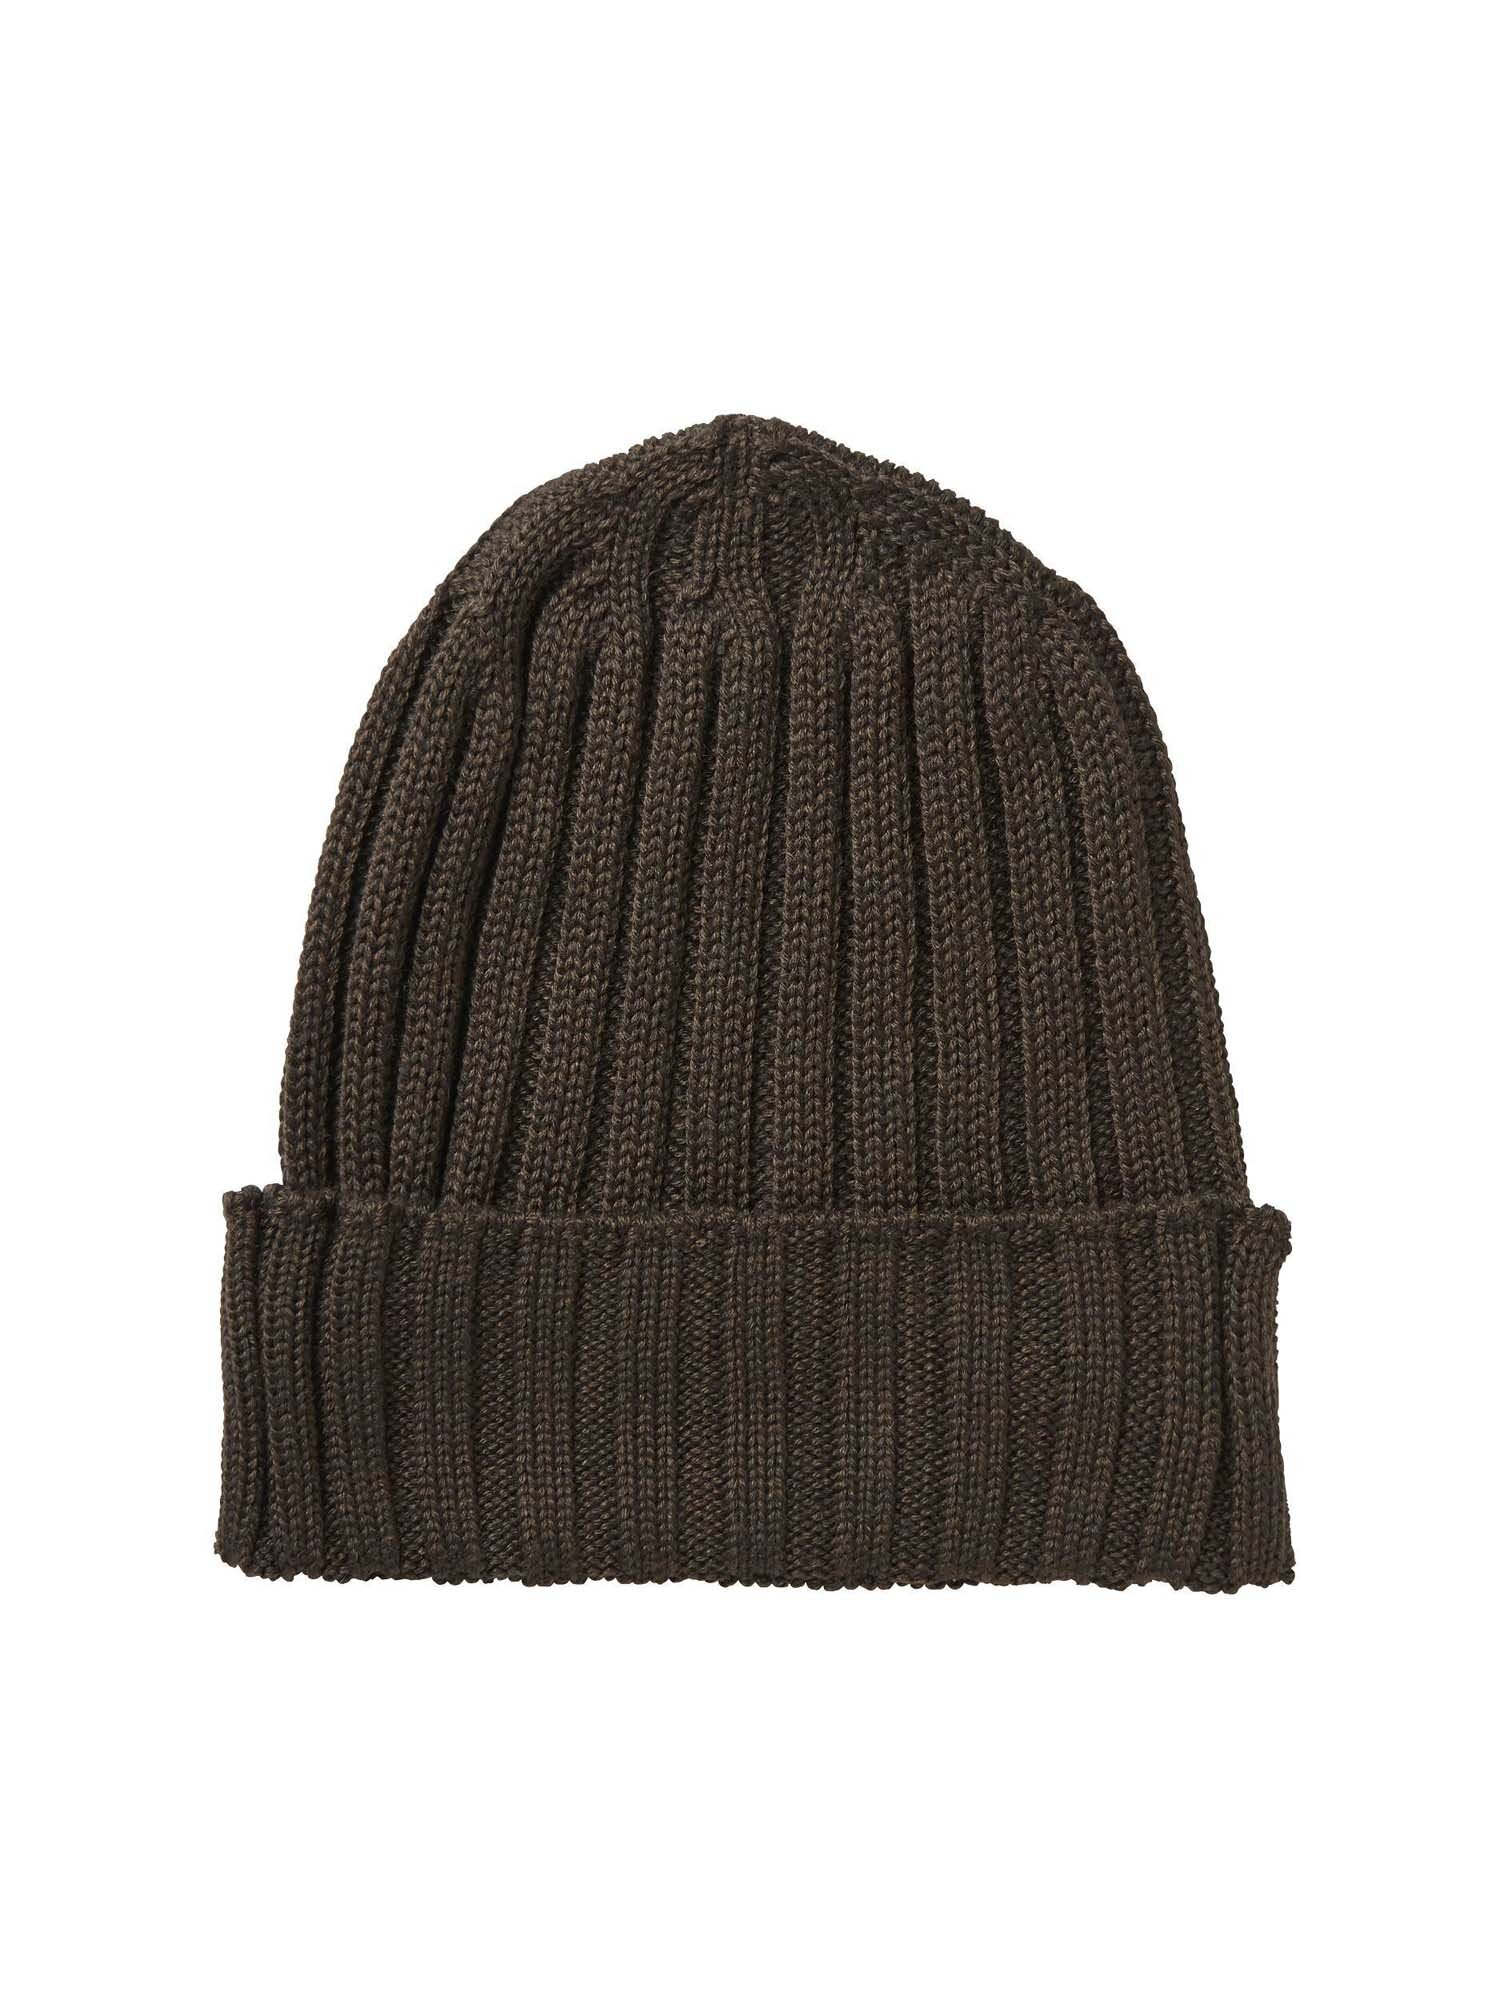 Select Point Wool Beanie